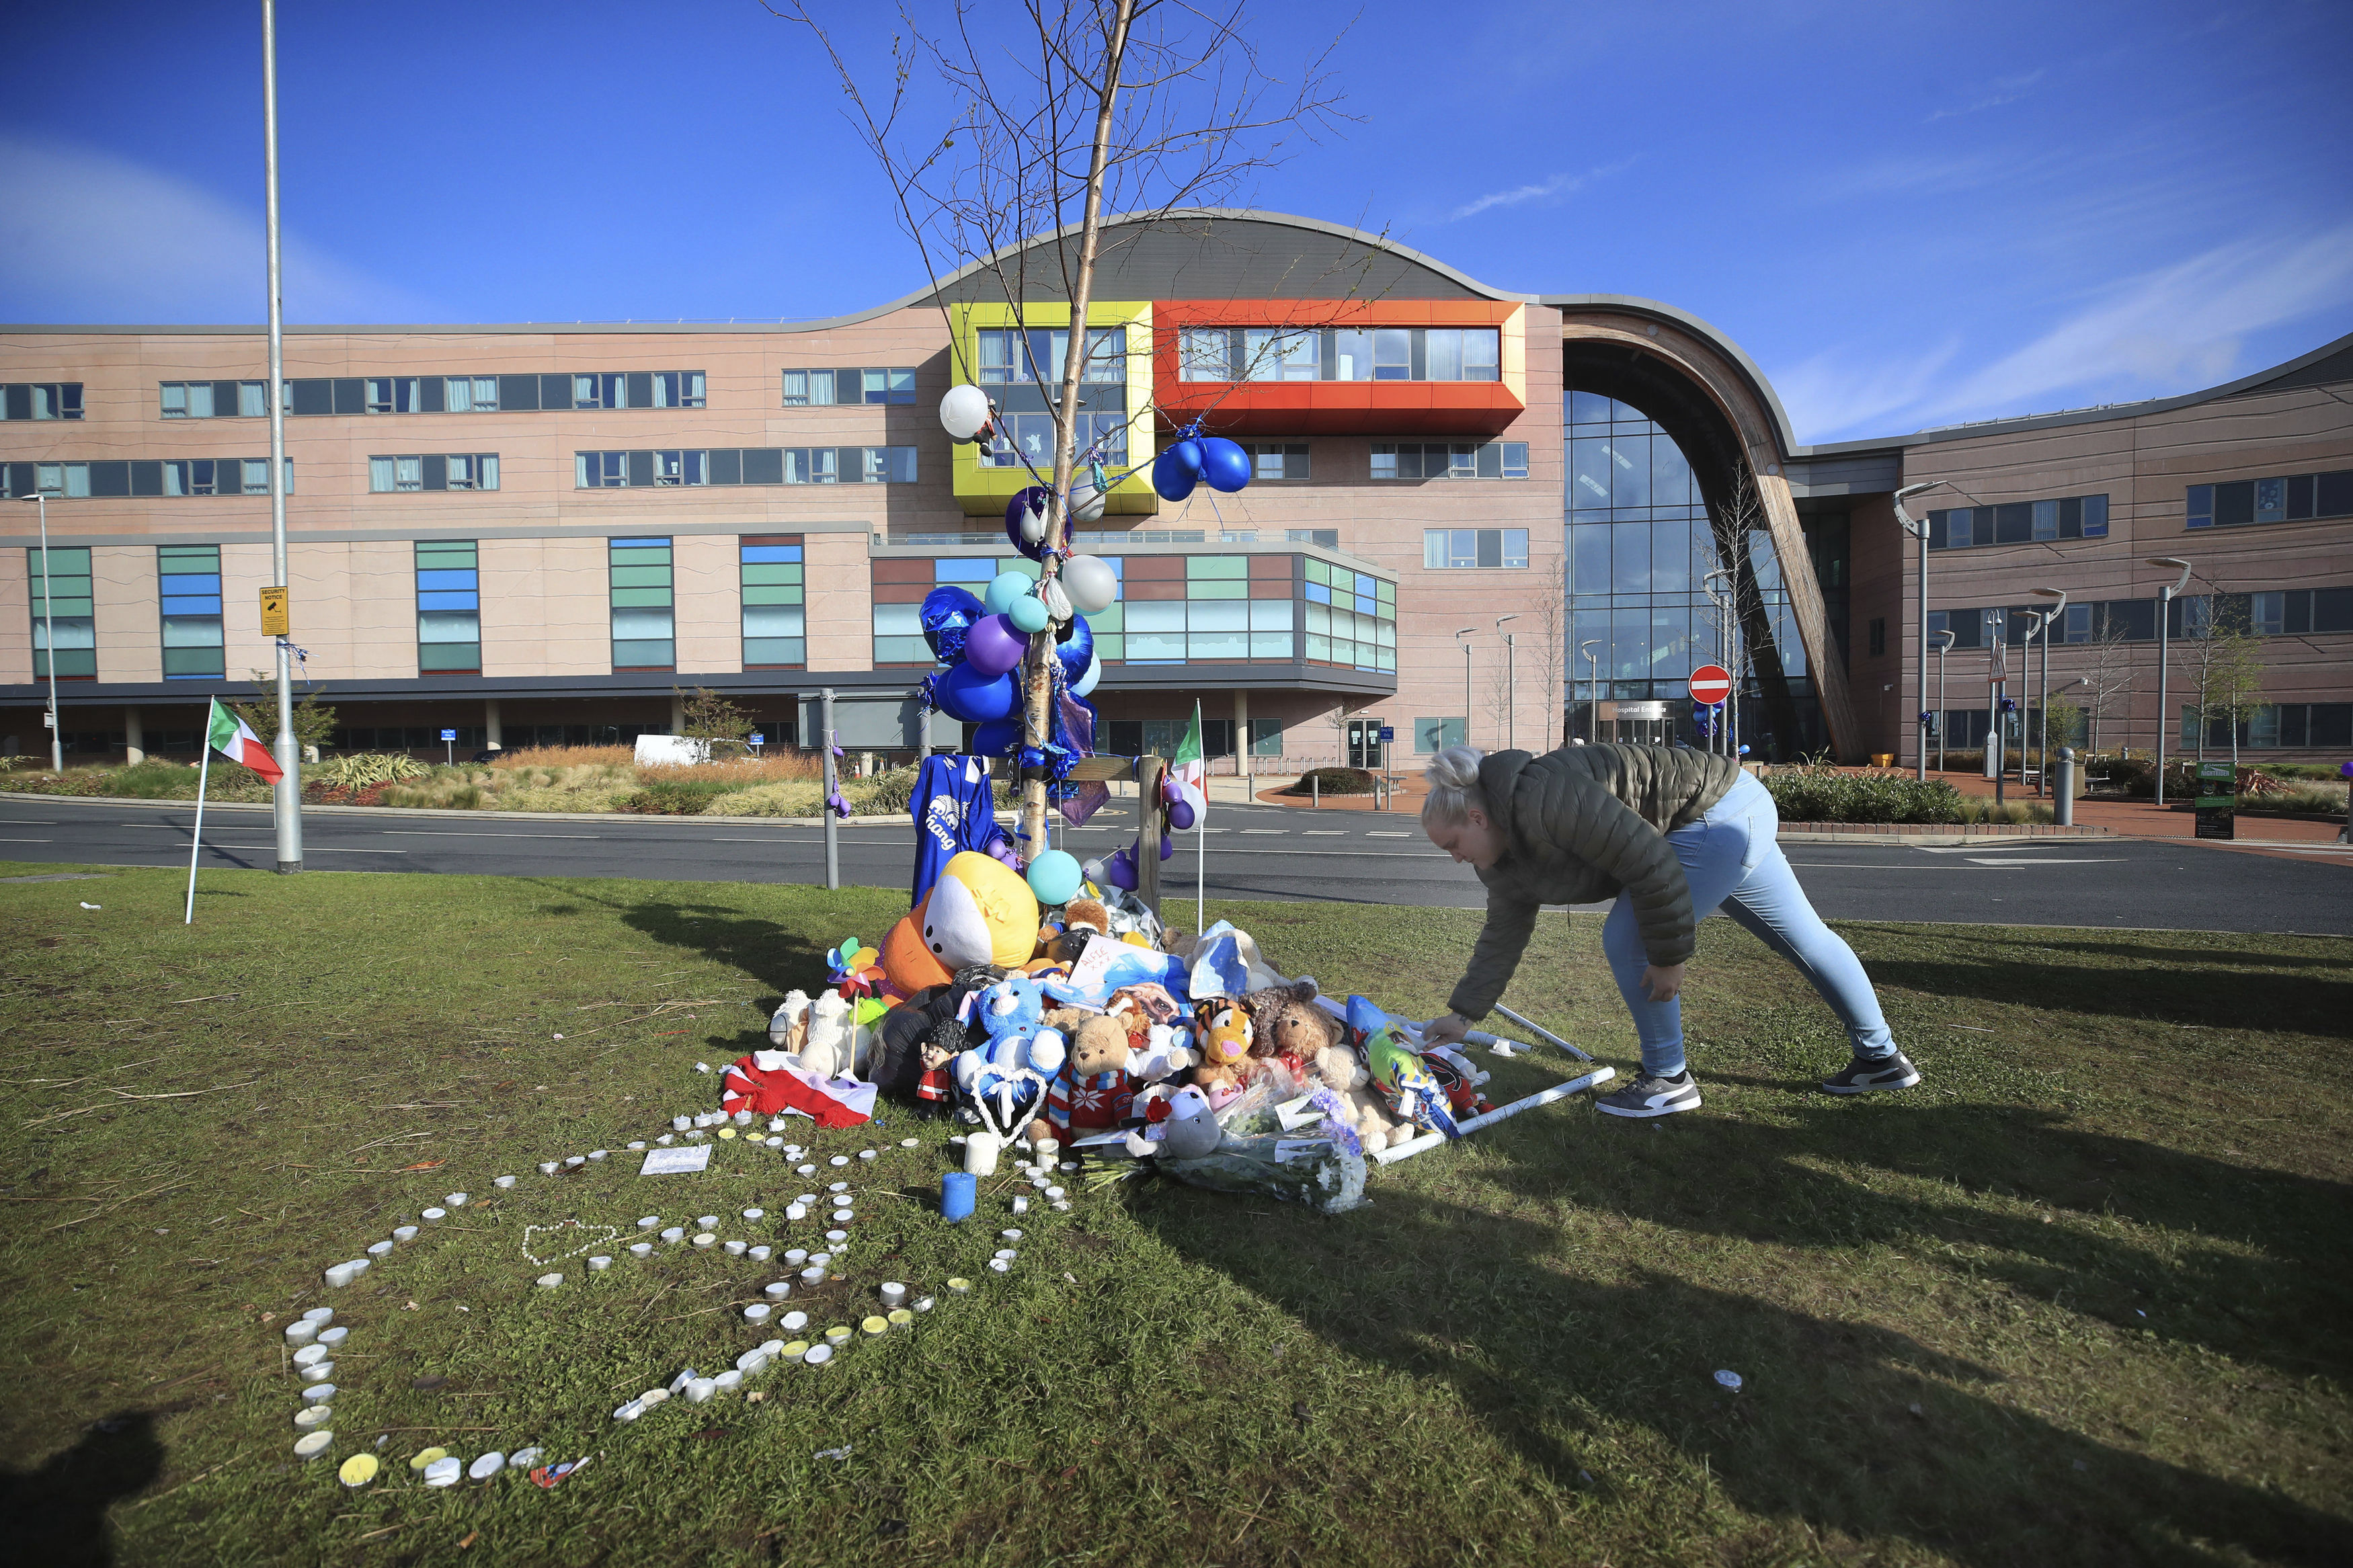 A woman leaves a soft toy outside Alder Hey Children's Hospital in Liverpool, England, following the death of 23-month-old, Alfie Evans, Saturday April 28, 2018. Alfie Evans, the sick British toddler whose parents won support from Pope Francis during a protracted legal battle over his treatment, died early Saturday. He was 23 months old. (Peter Byrne/PA via AP)